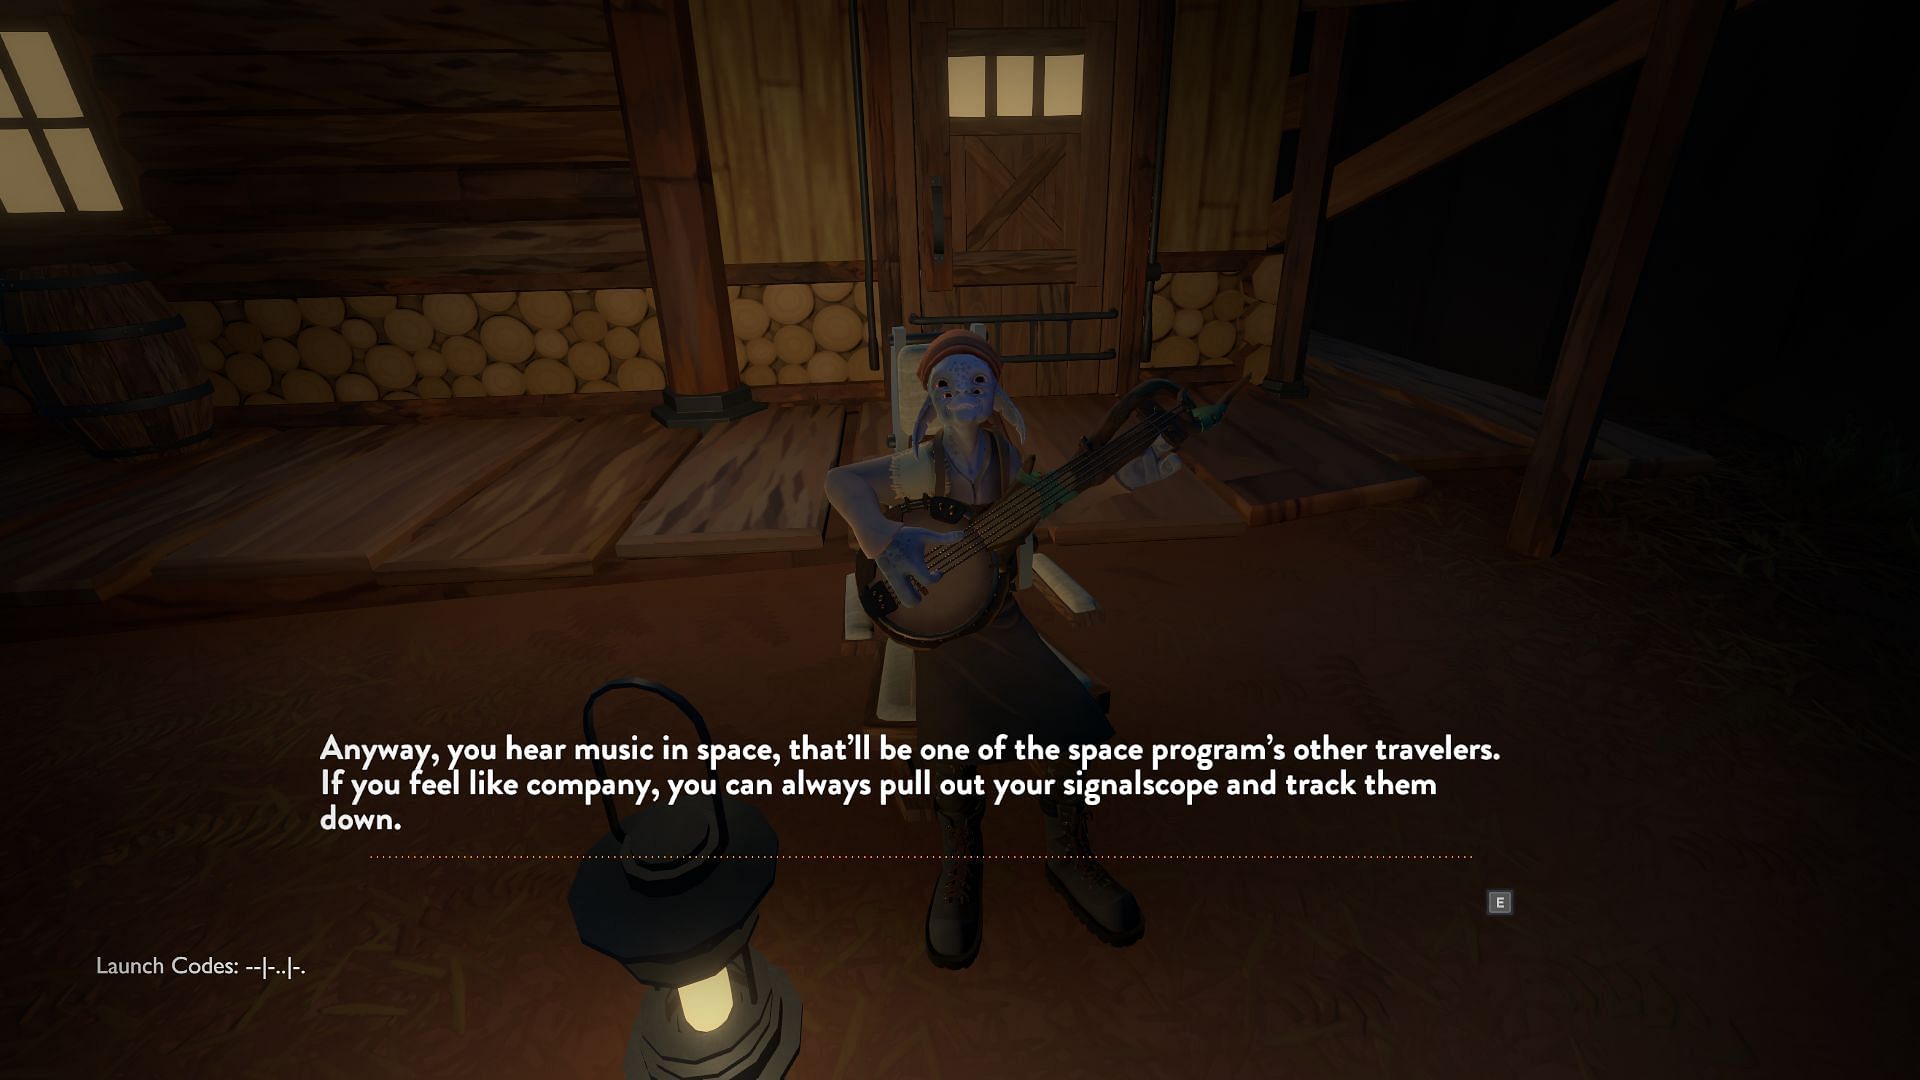 Gneiss talking about music in space (Image via Outer Wilds)